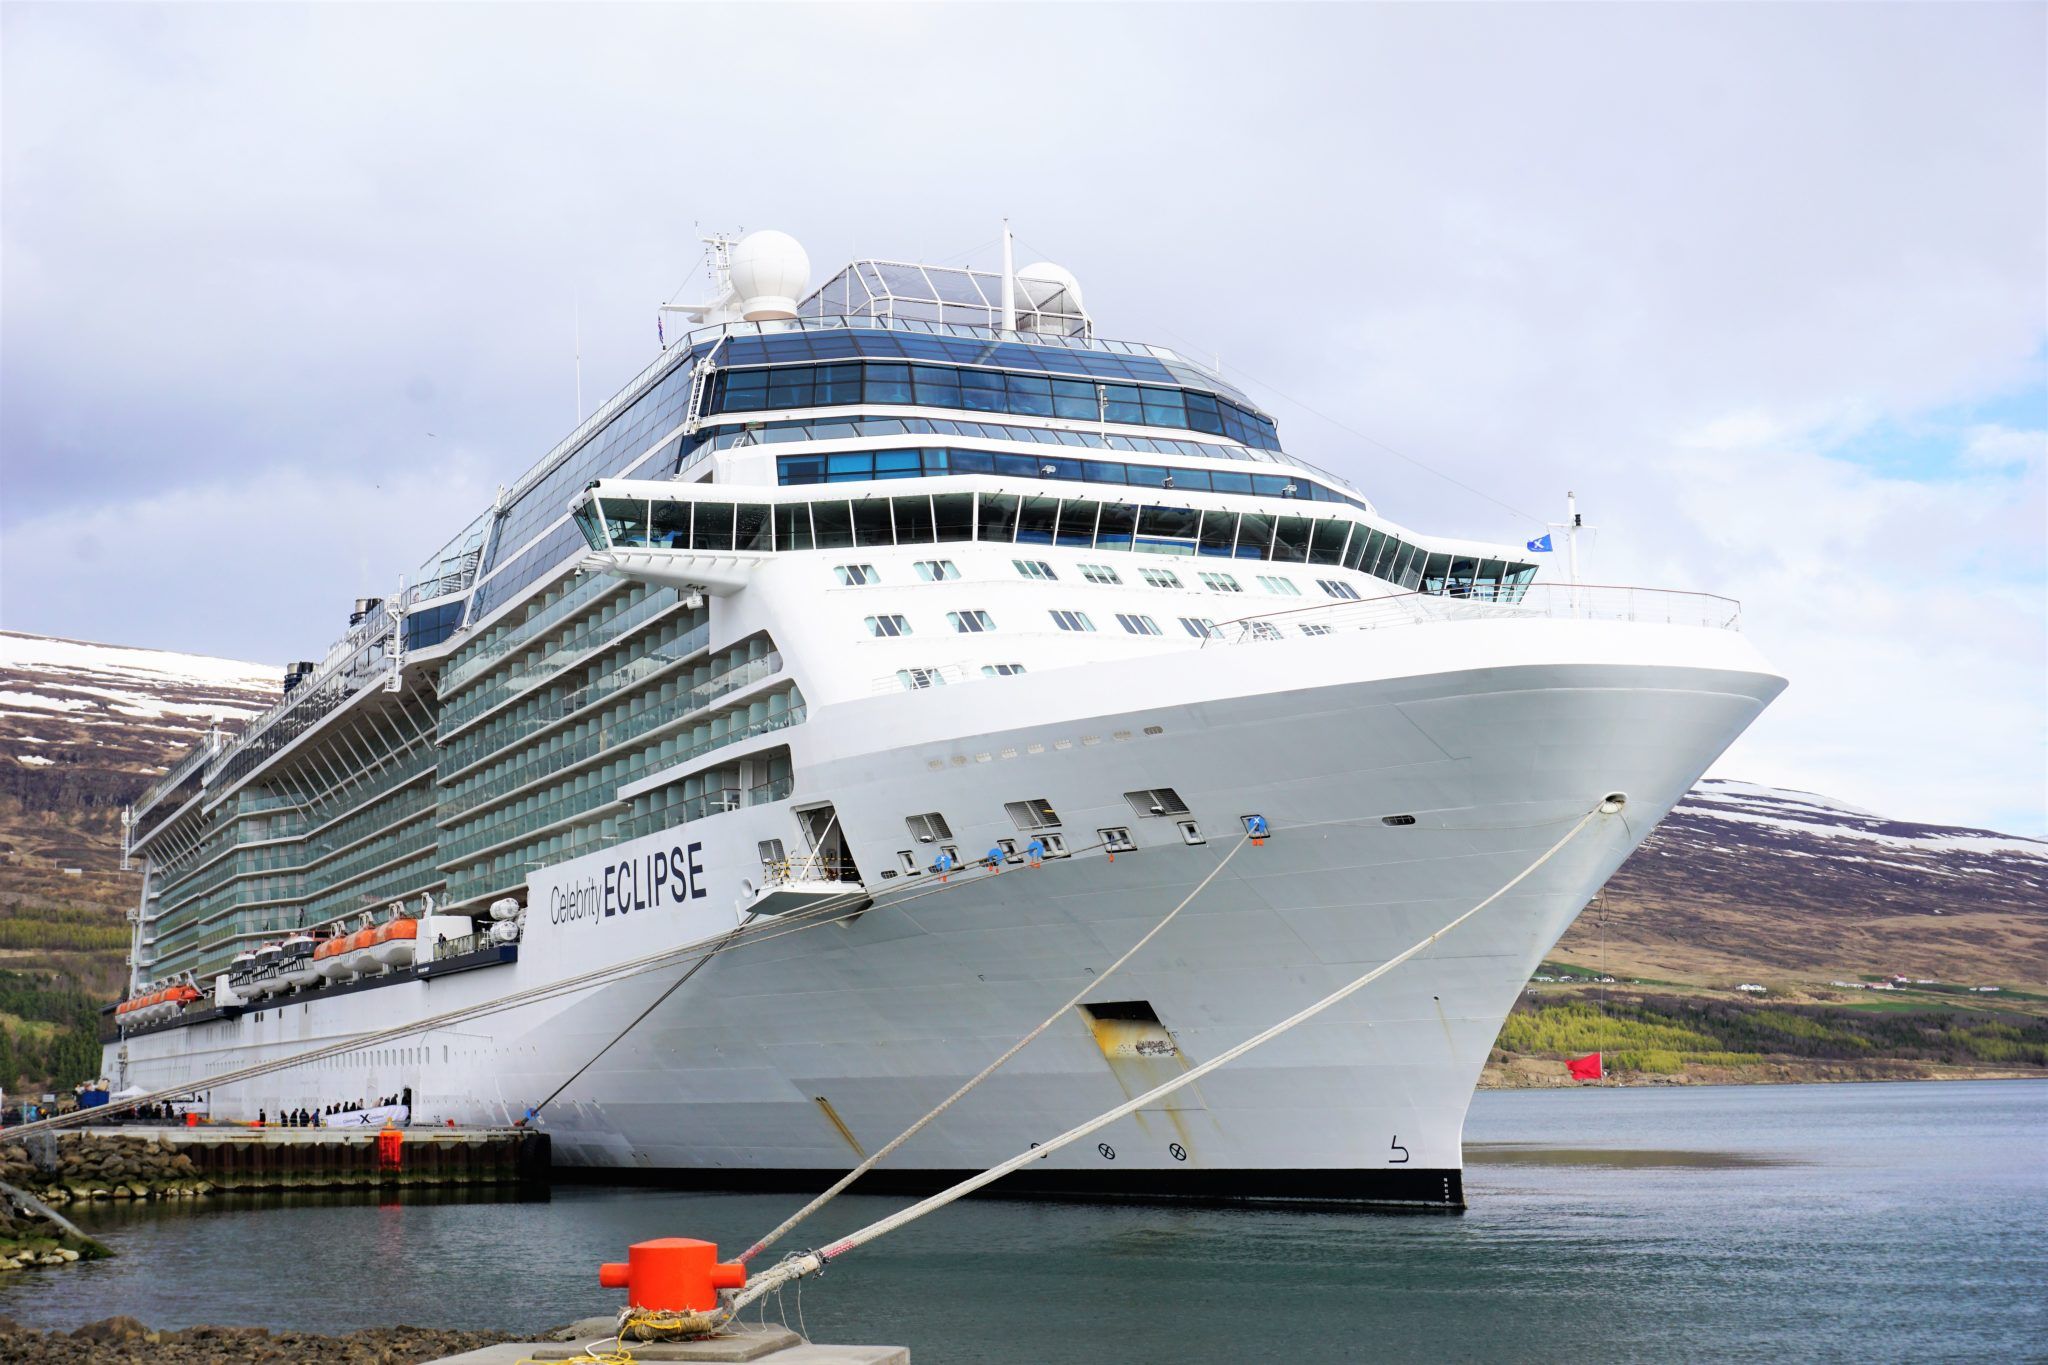 CDC Extends No Sail Order for Cruise Ships